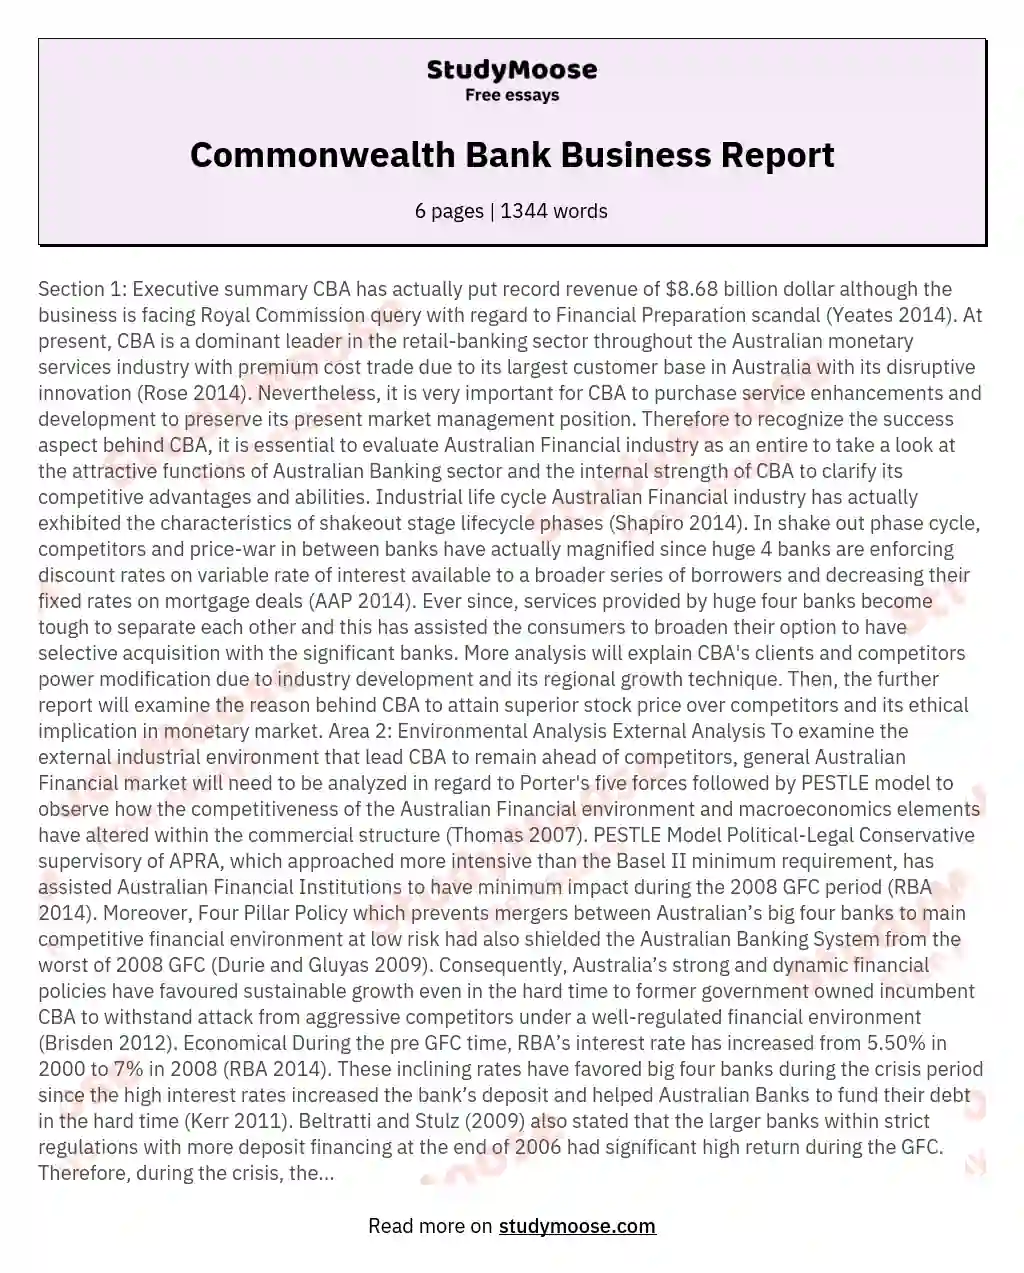 Commonwealth Bank Business Report essay